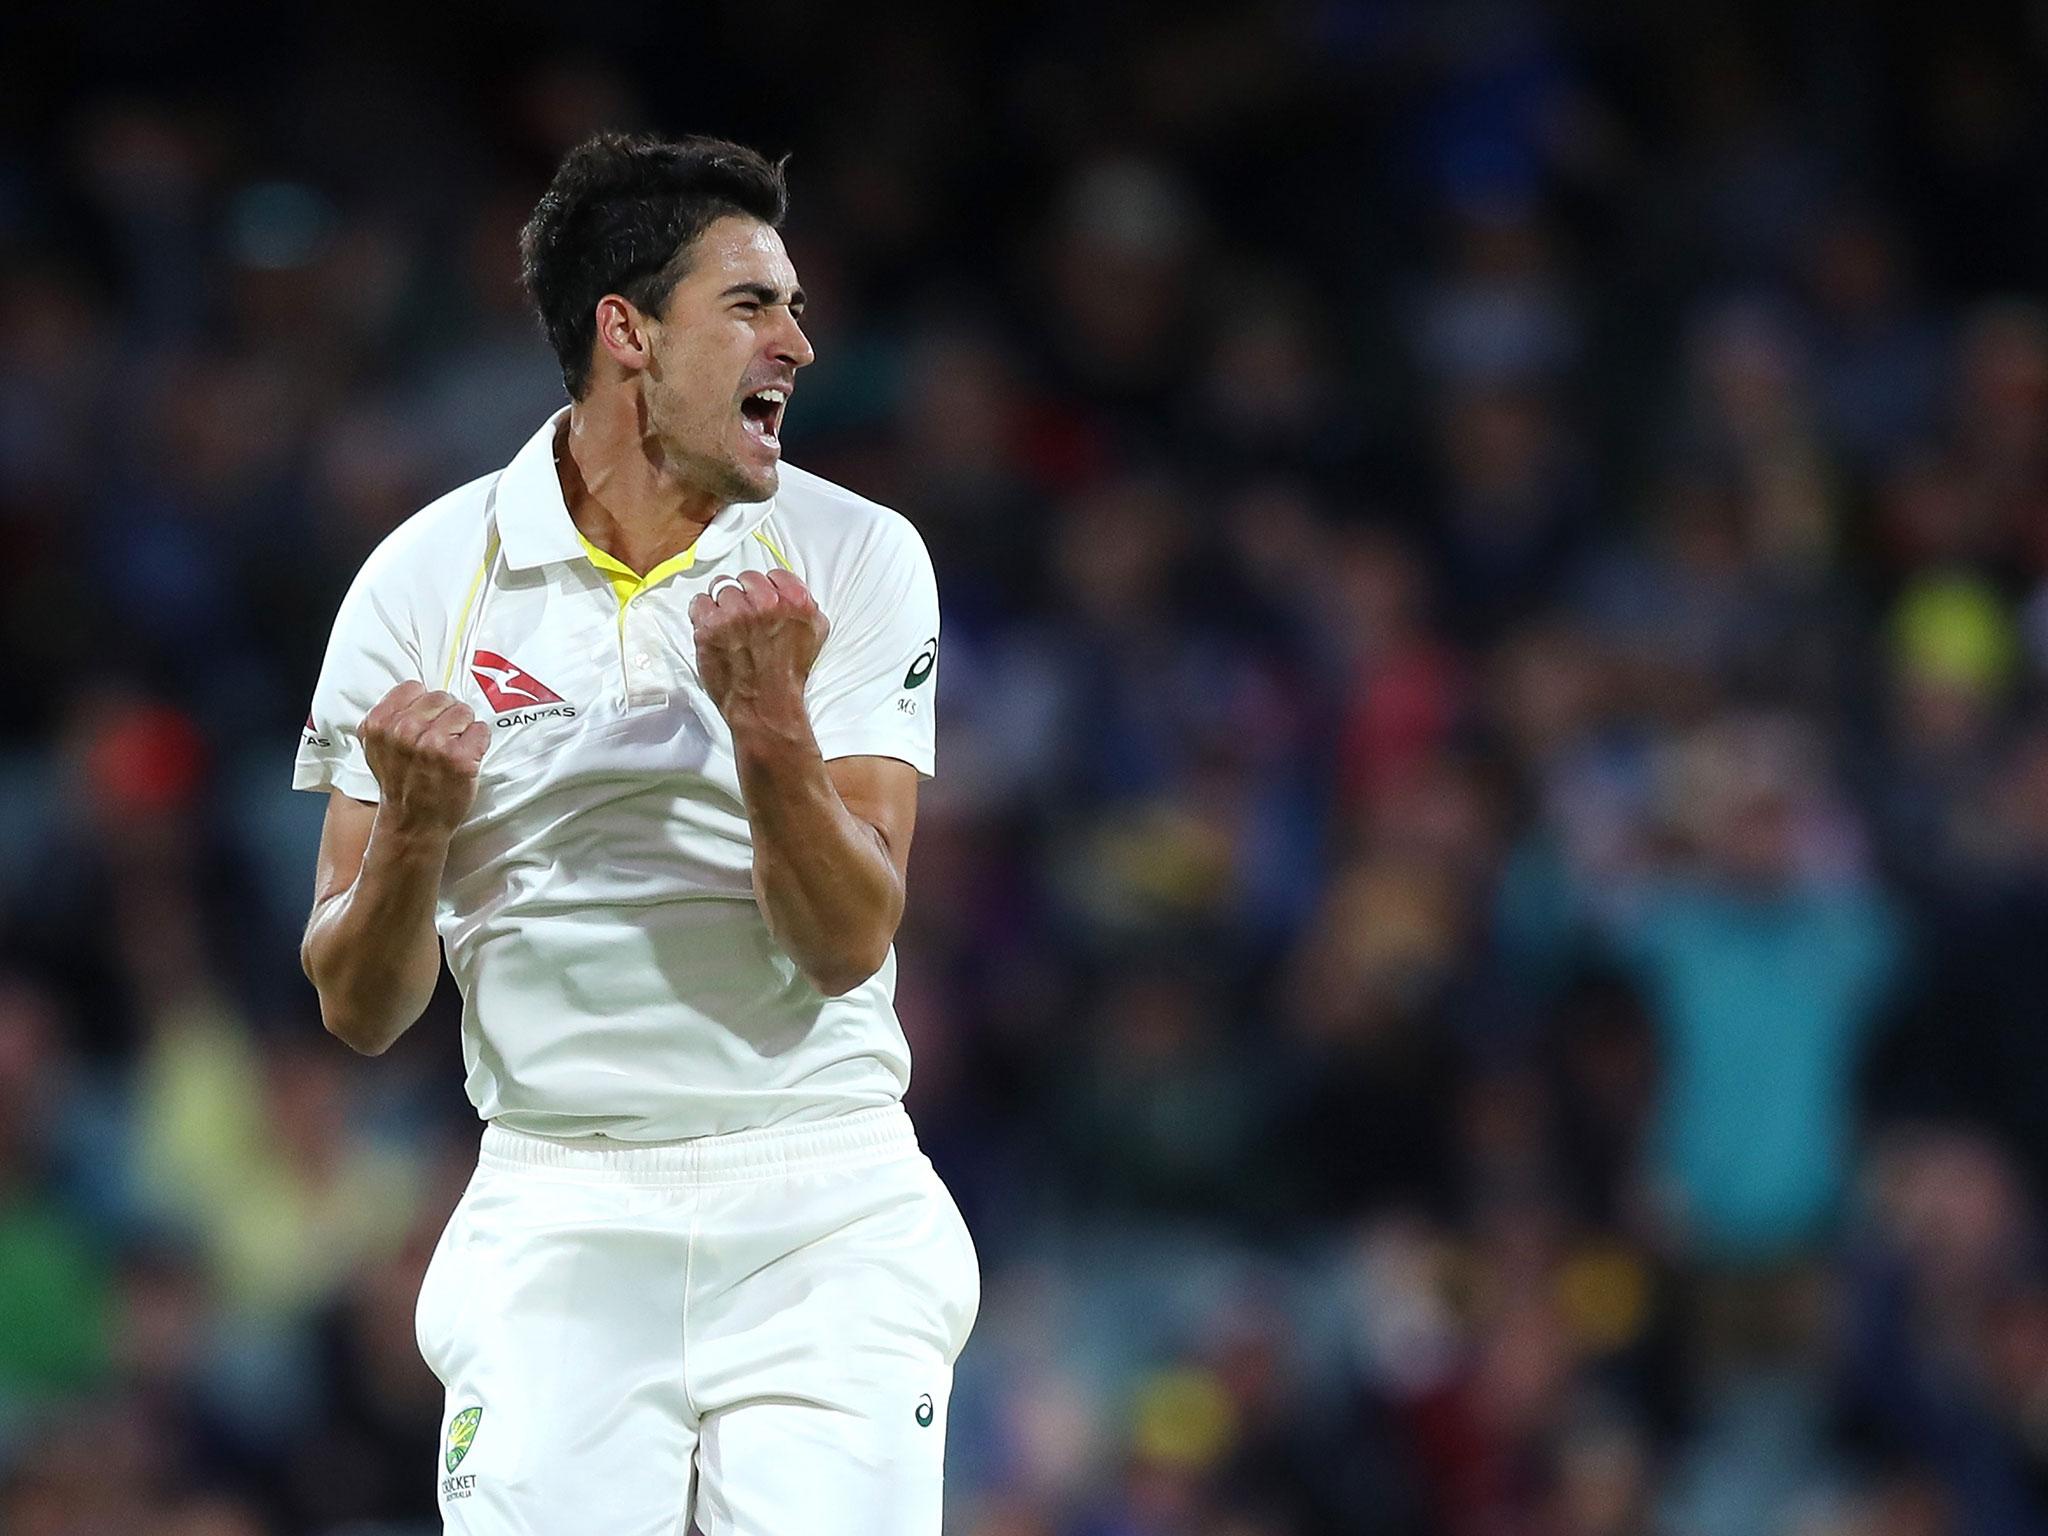 Starc feels that his side were still on top despite losing most of their top order cheaply in the difficult night session